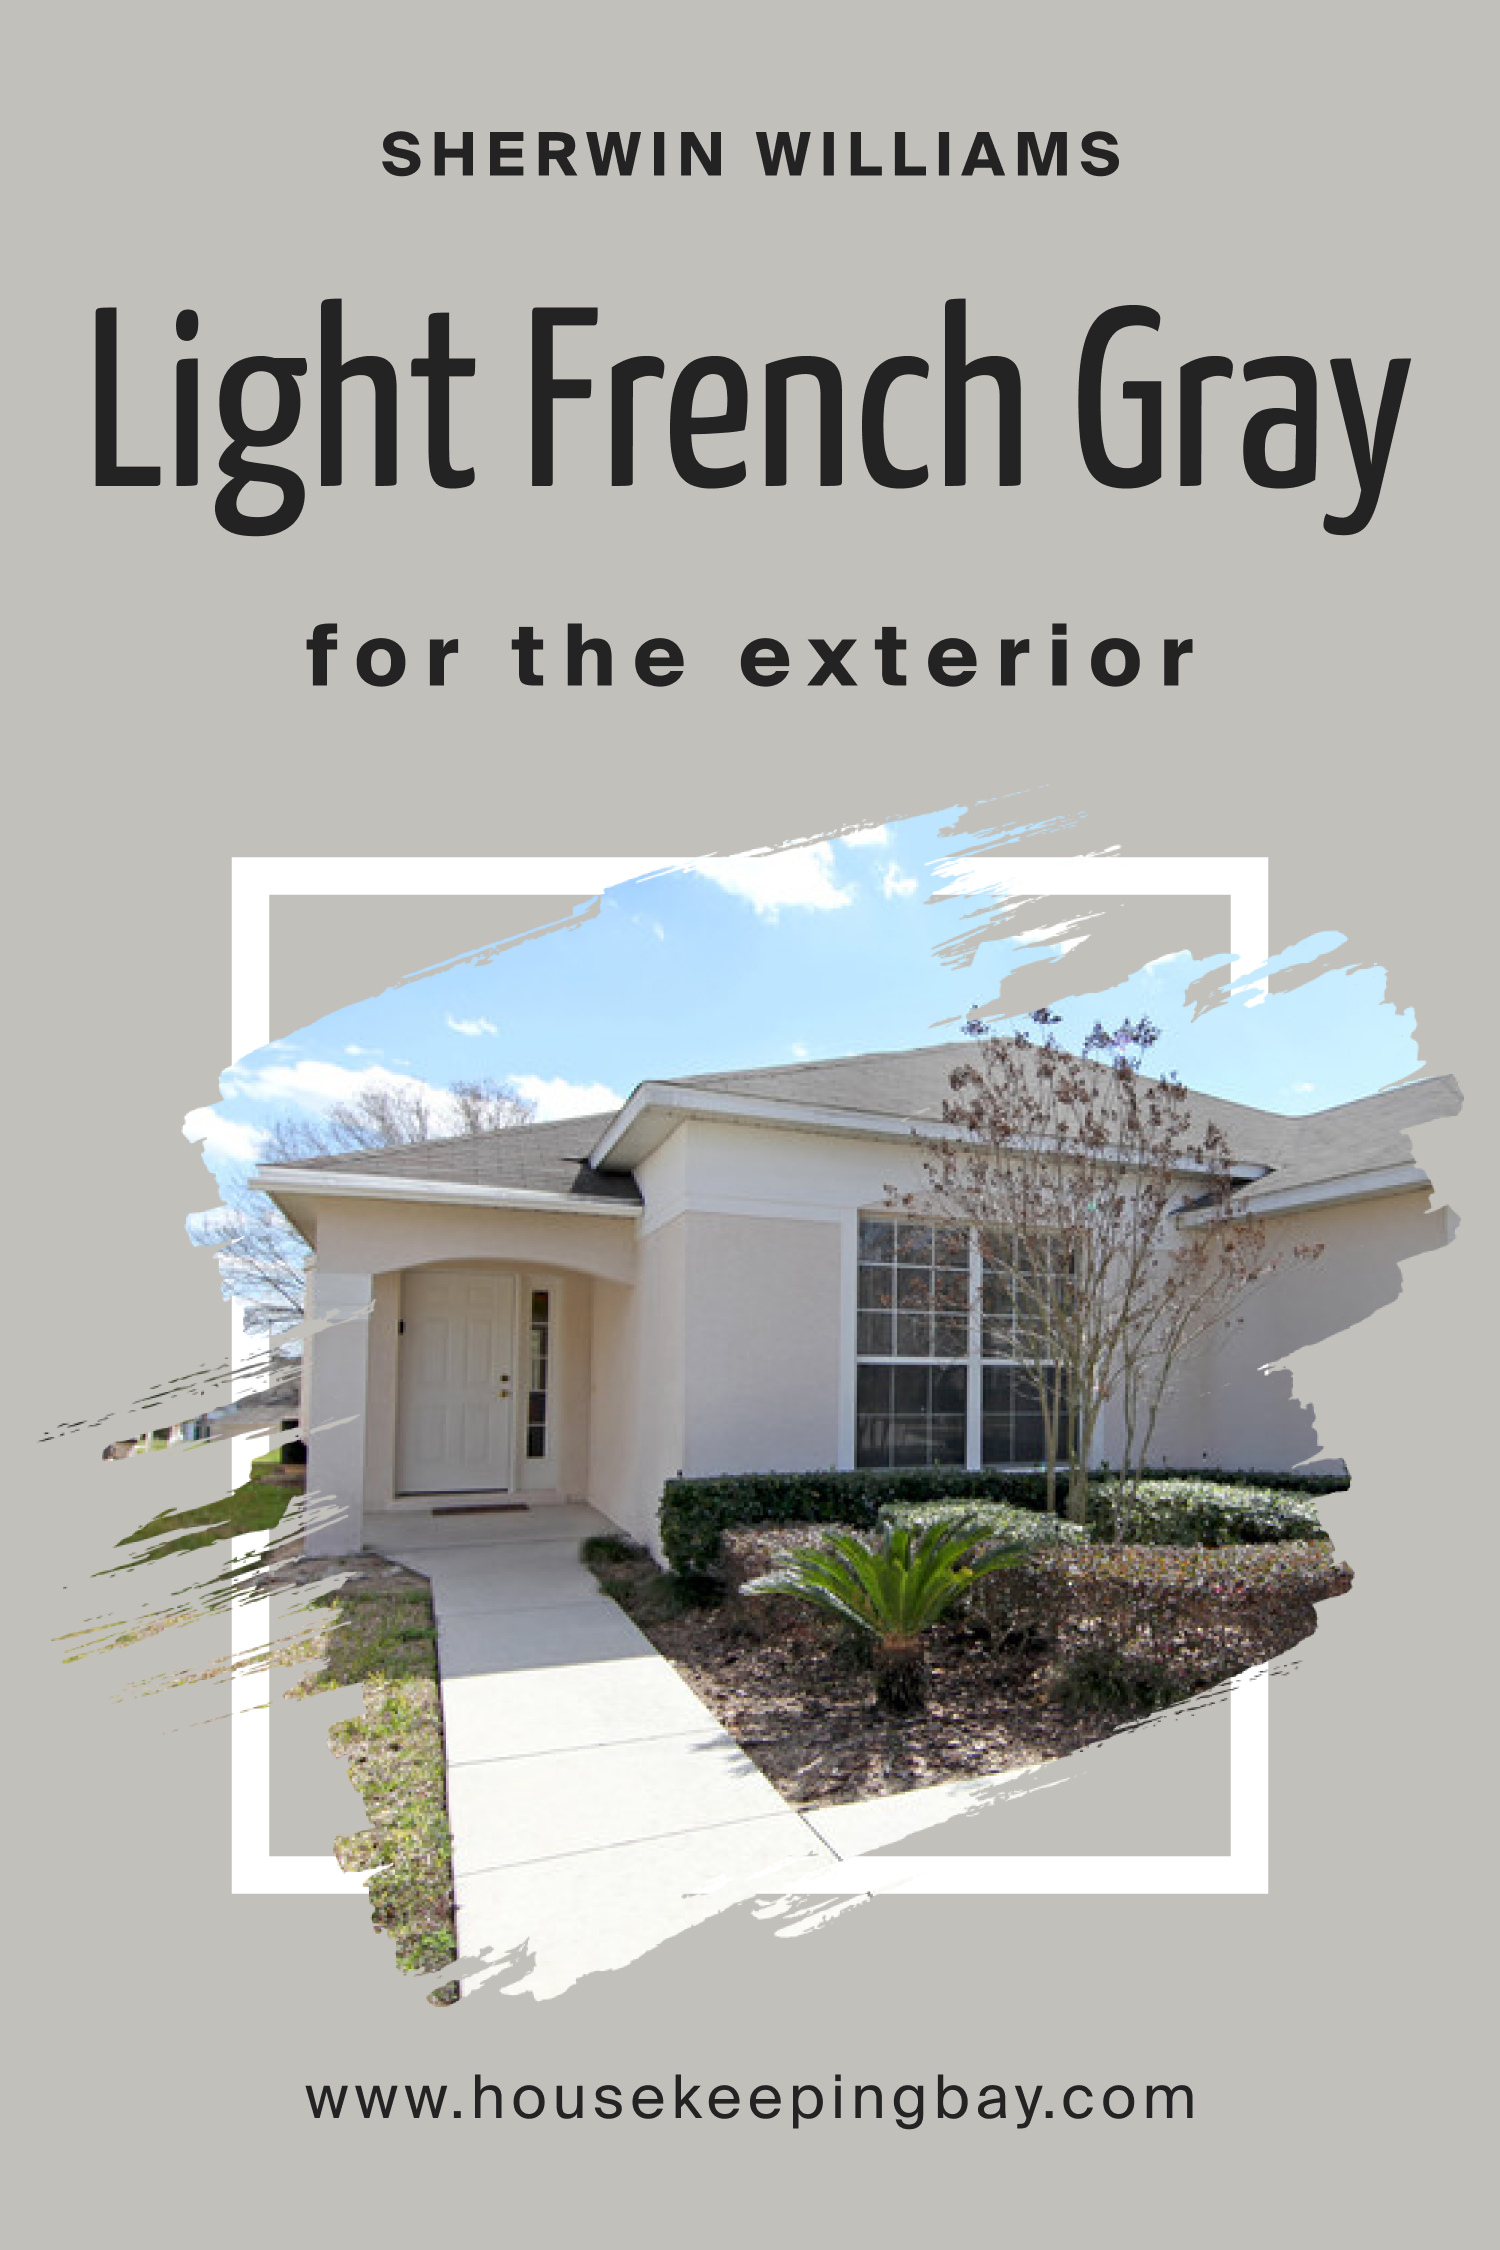 Sherwin Williams. Light French Gray For the exterior